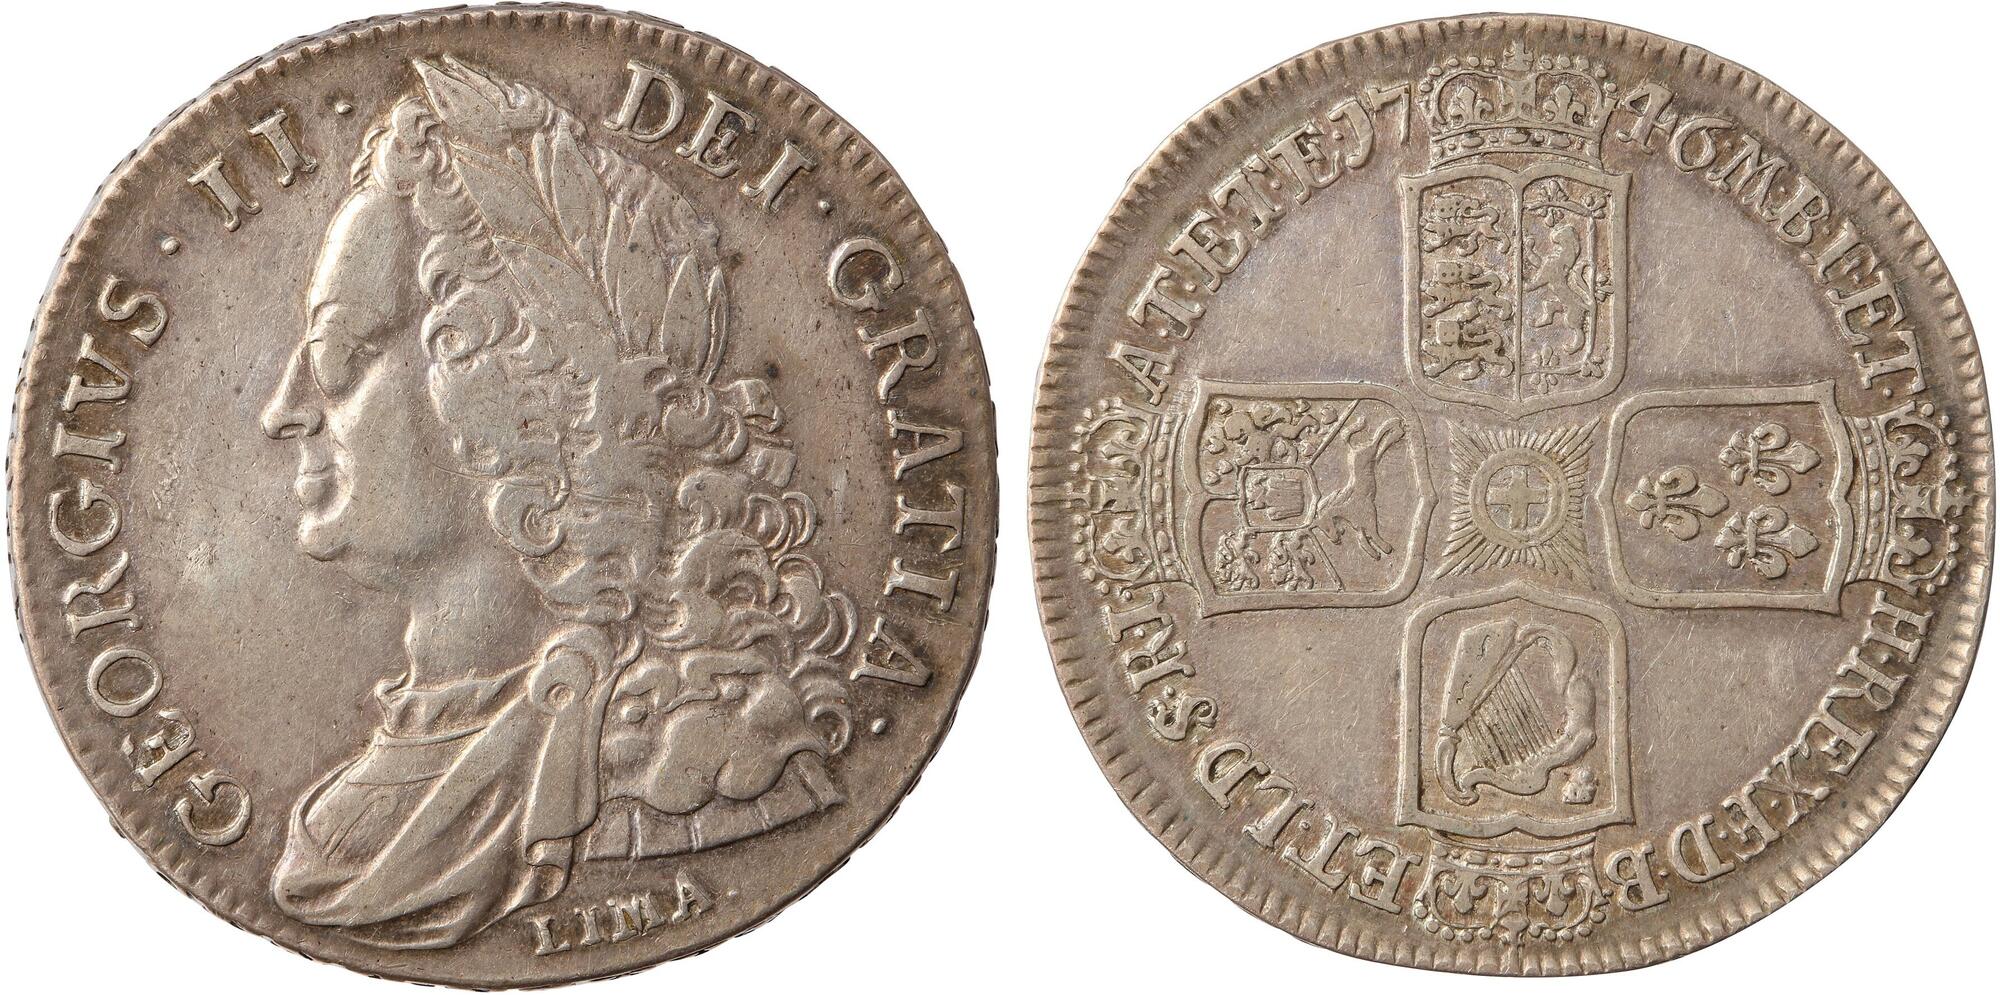 Near Extremely Fine example of a 1746 Lima crown 